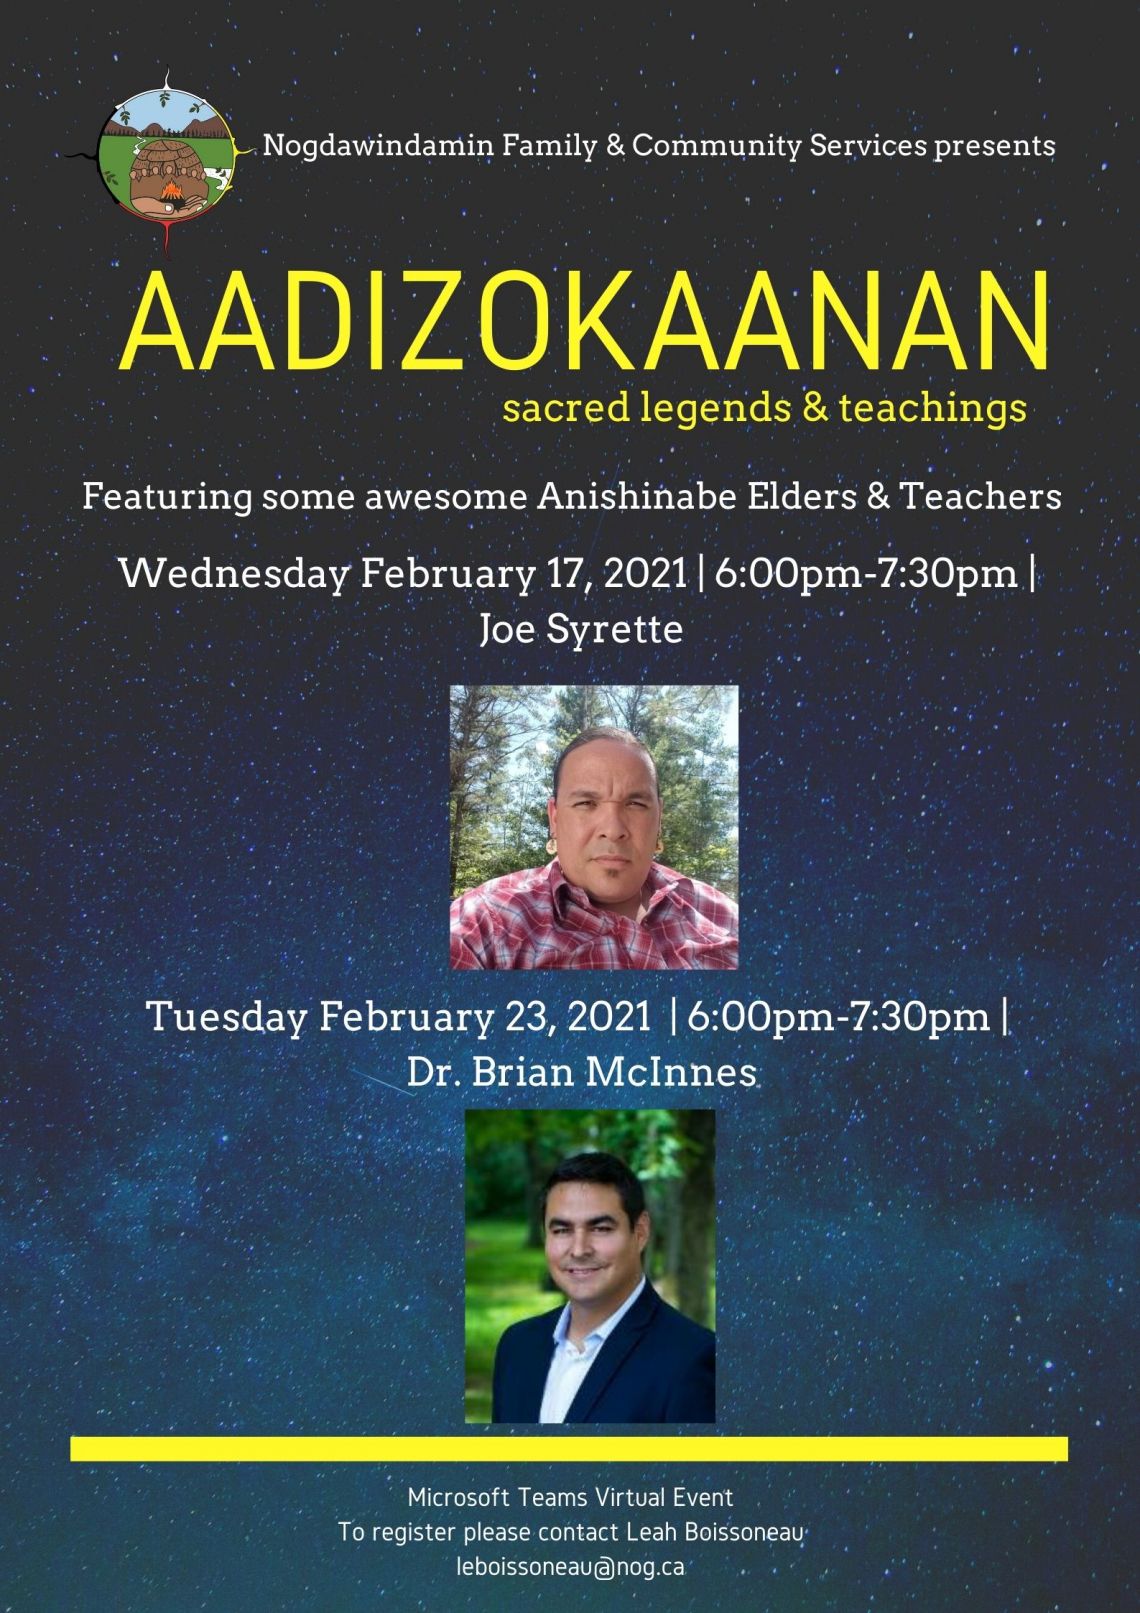 Nogdawindamin Family and Community Services Presents Aadizokaanan sacred legends and teachings.  Featuring some awesome Anishnabe Elders and Teachers.  Wednesday February 17th 2021 from 6:00pm to 7:30pm Joe Syrette.  Tuesday February 23 2021 from 6:00pm to 7:30pm Dr. Brian McInnes.  Microsoft Teams virtual event.  To register contact Leah Boissoneau email leboissoneau@nog.ca